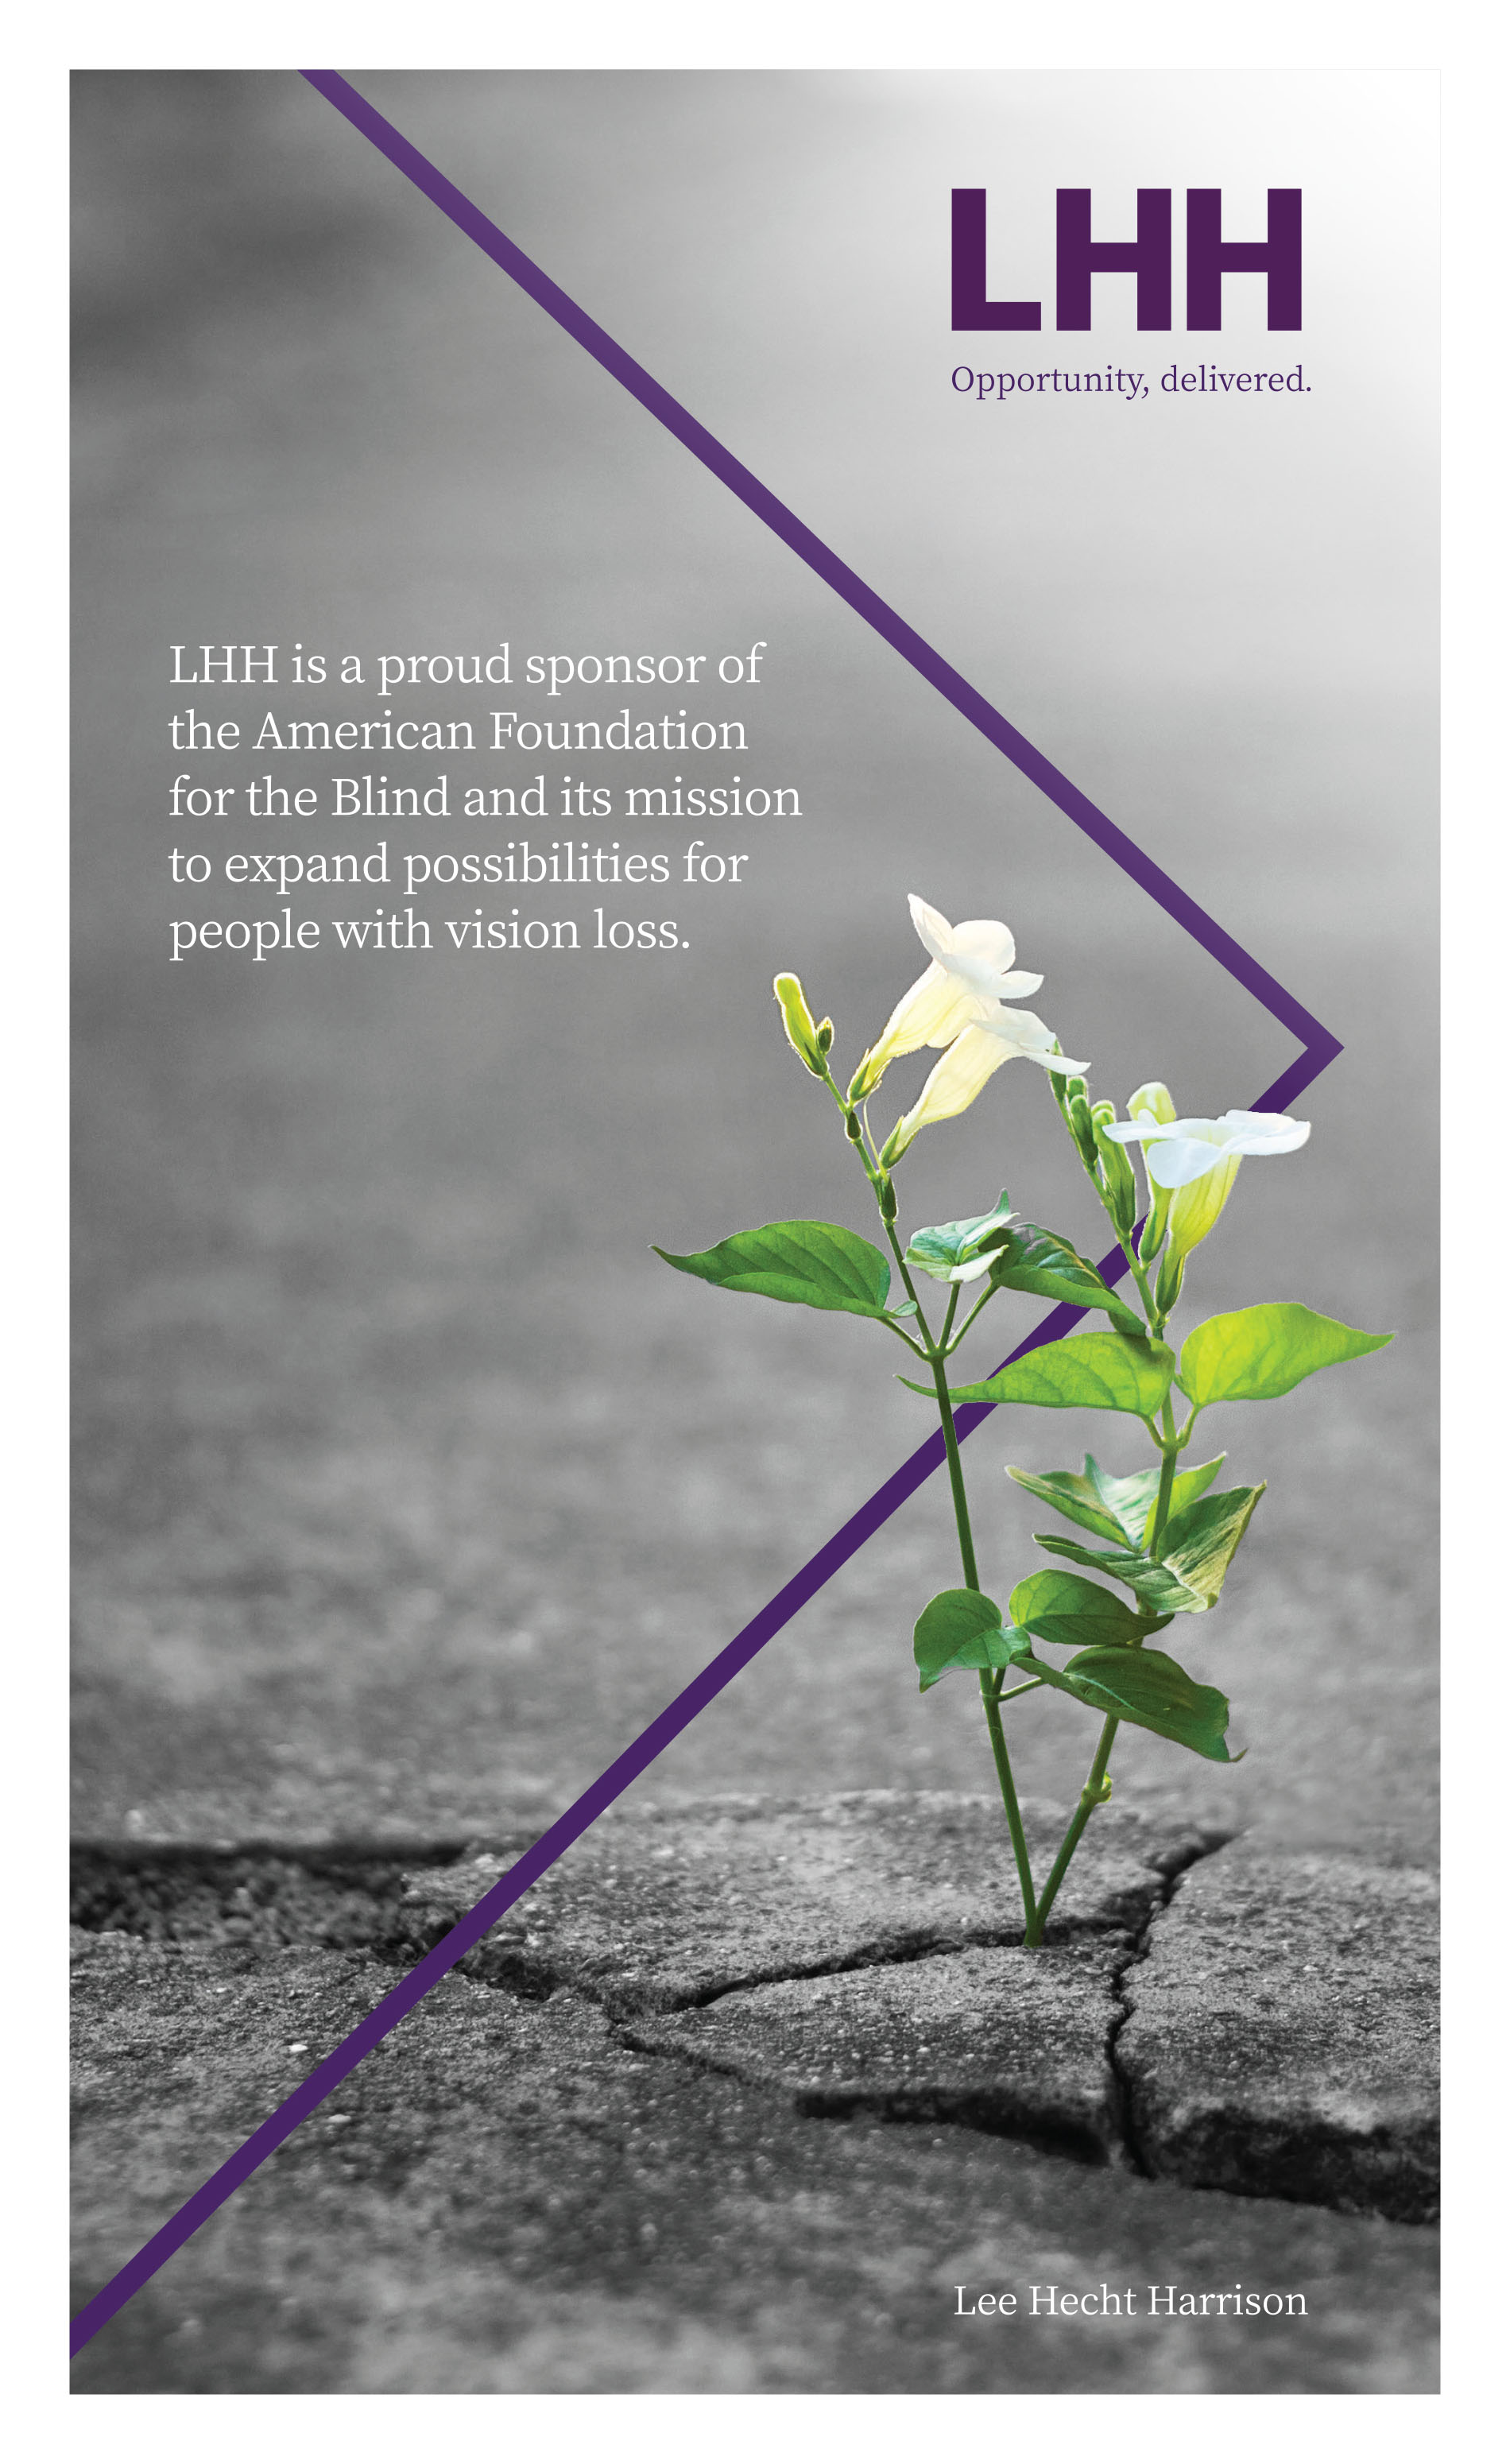 Lee Hecht Harrison HKAA 2020 Ad | American Foundation for the Blind